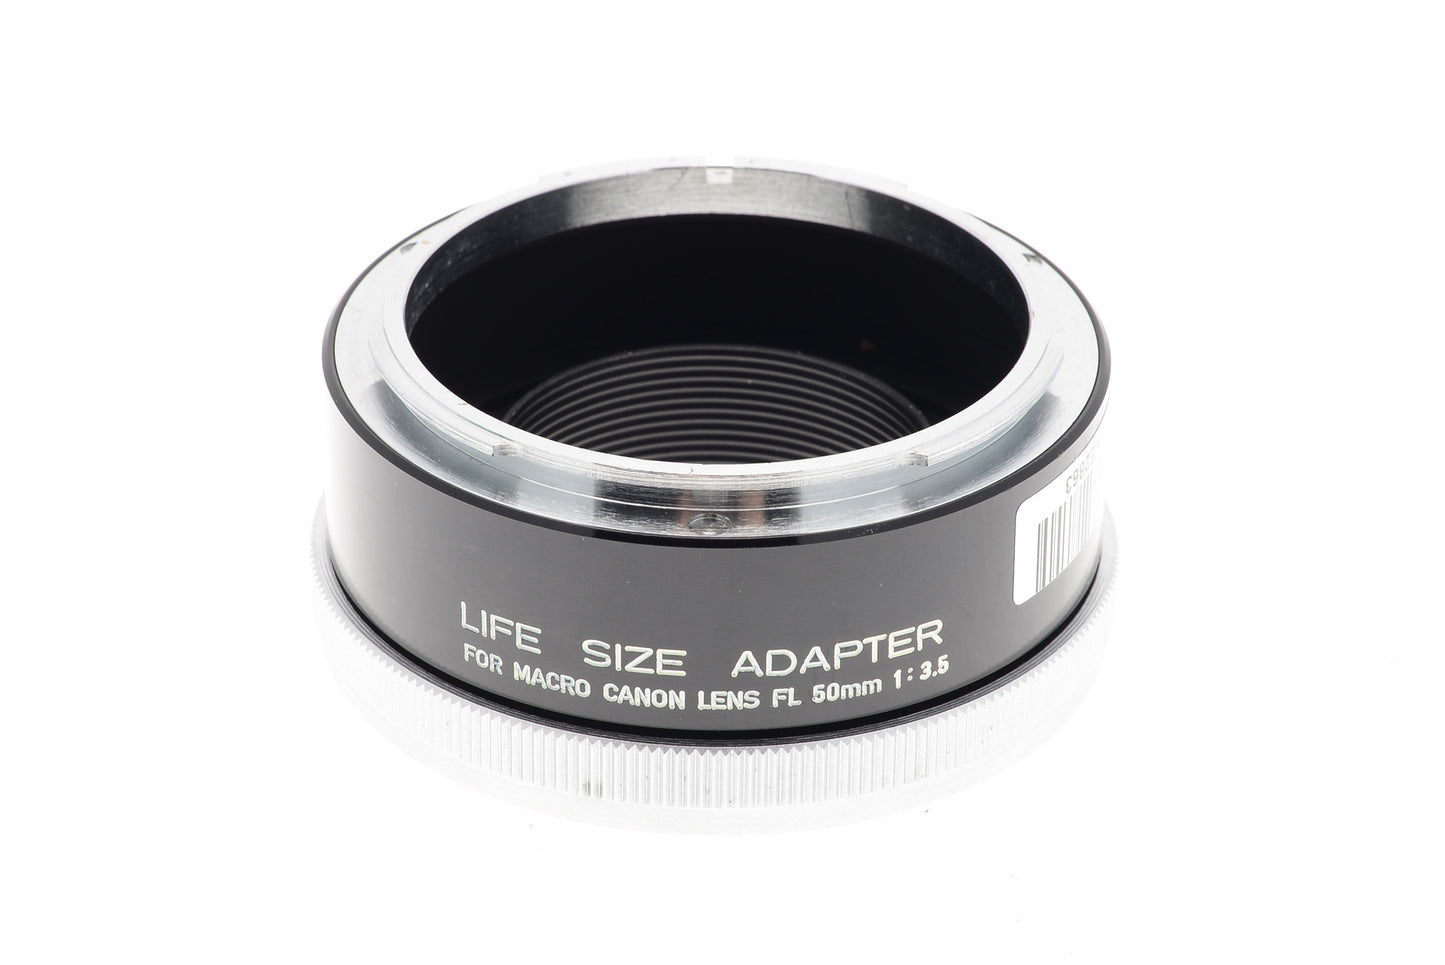 Canon Life Size Adapter for Canon Macro Lens FL 50mm f3.5 - Accessory